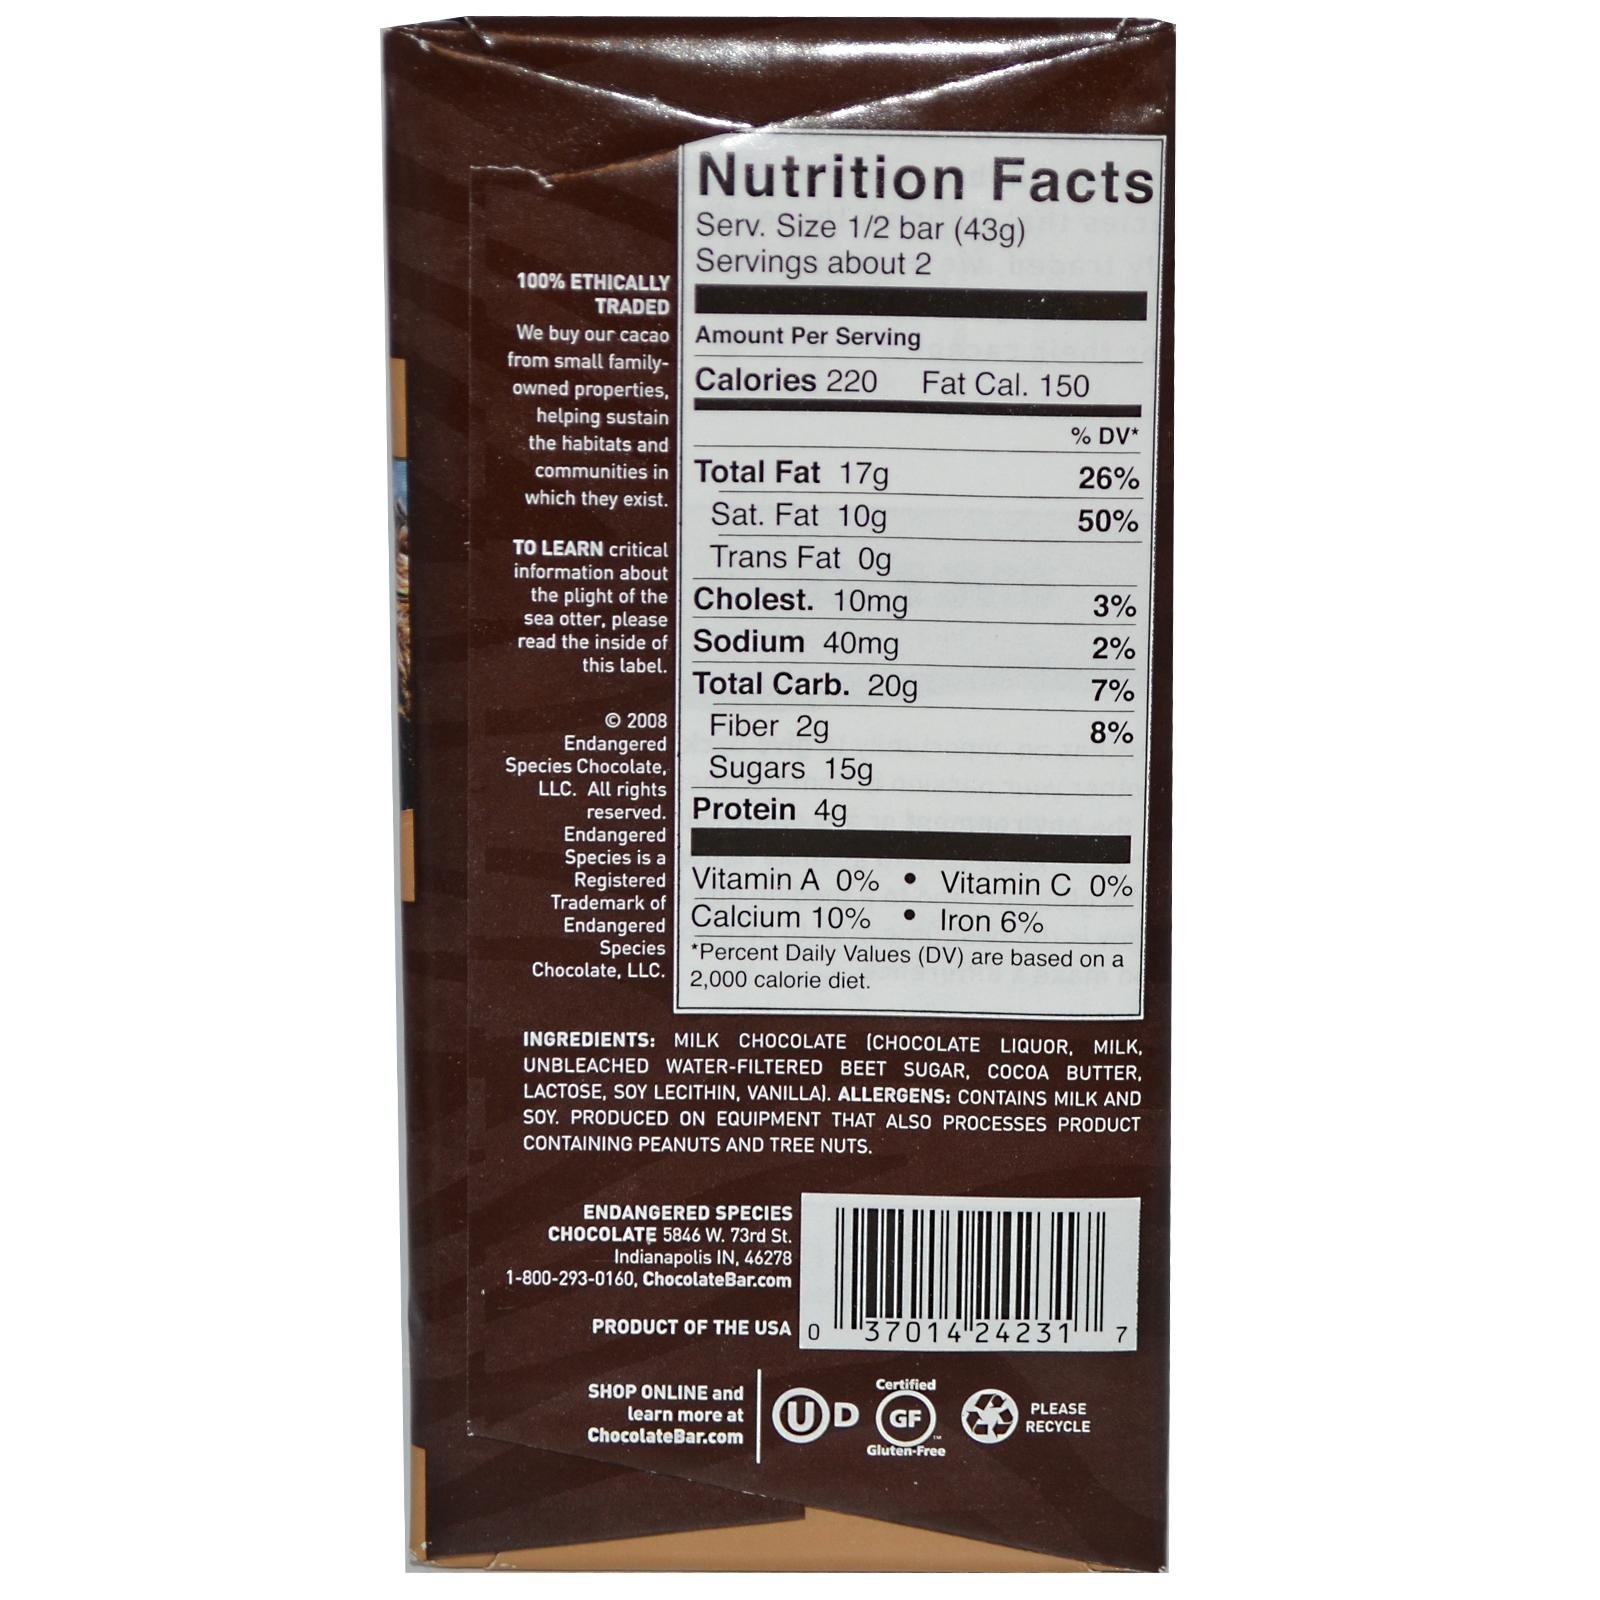 Close-up view of a chocolate bar label detailing cocoa content, origin, and other key information